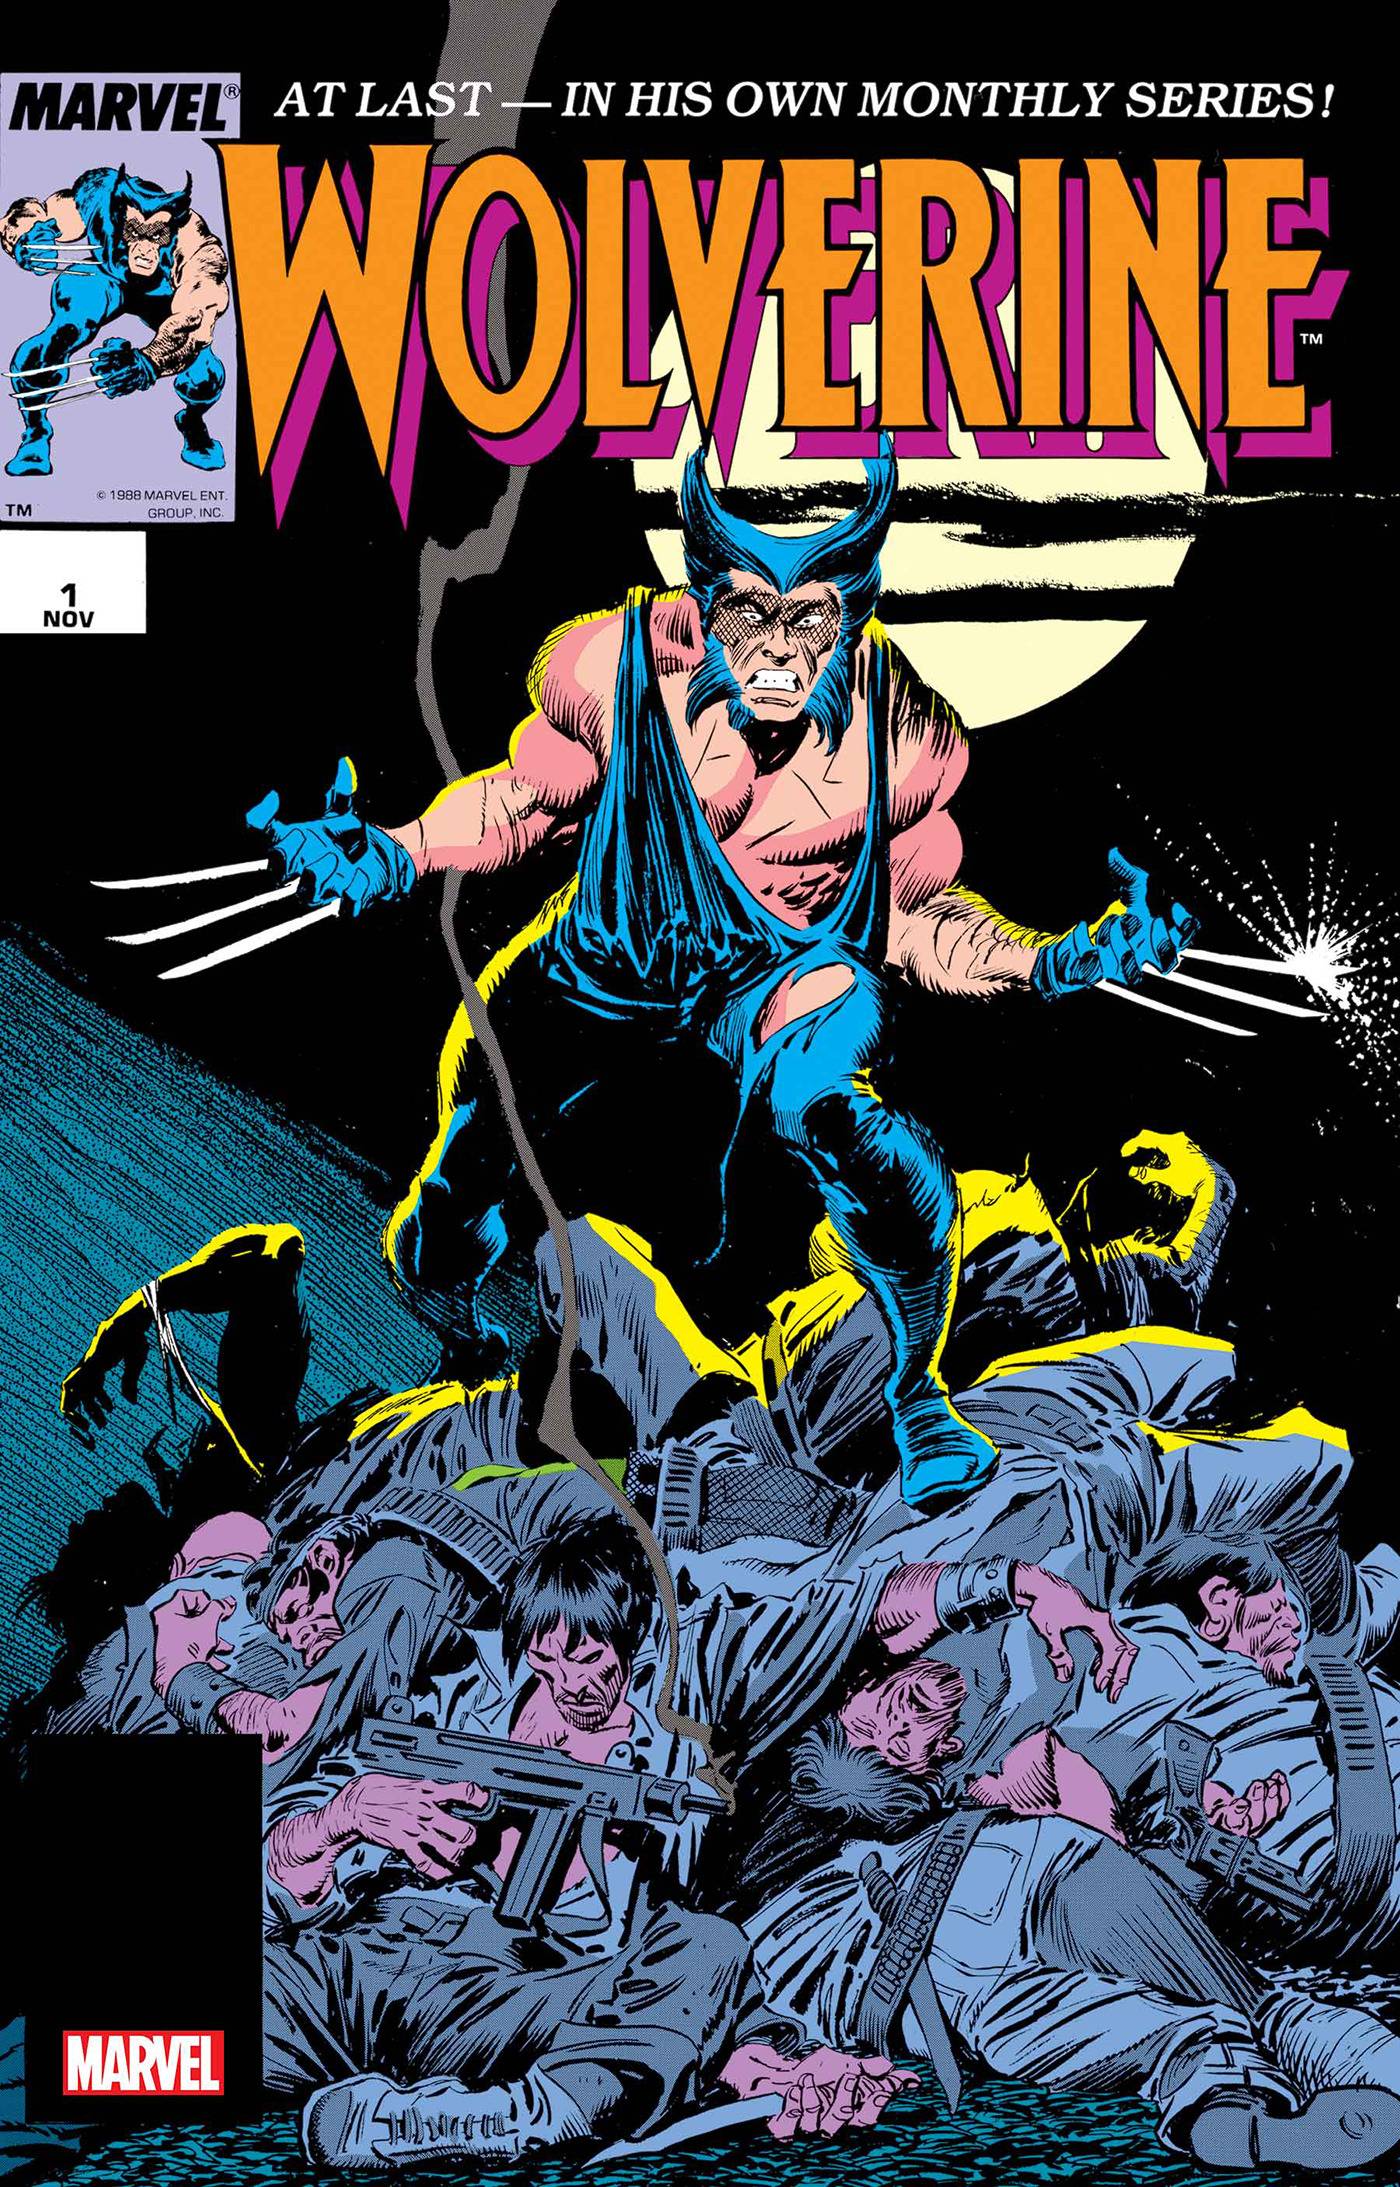 WOLVERINE BY CLAREMONT & BUSCEMA #1 FACSIMILE POSTER